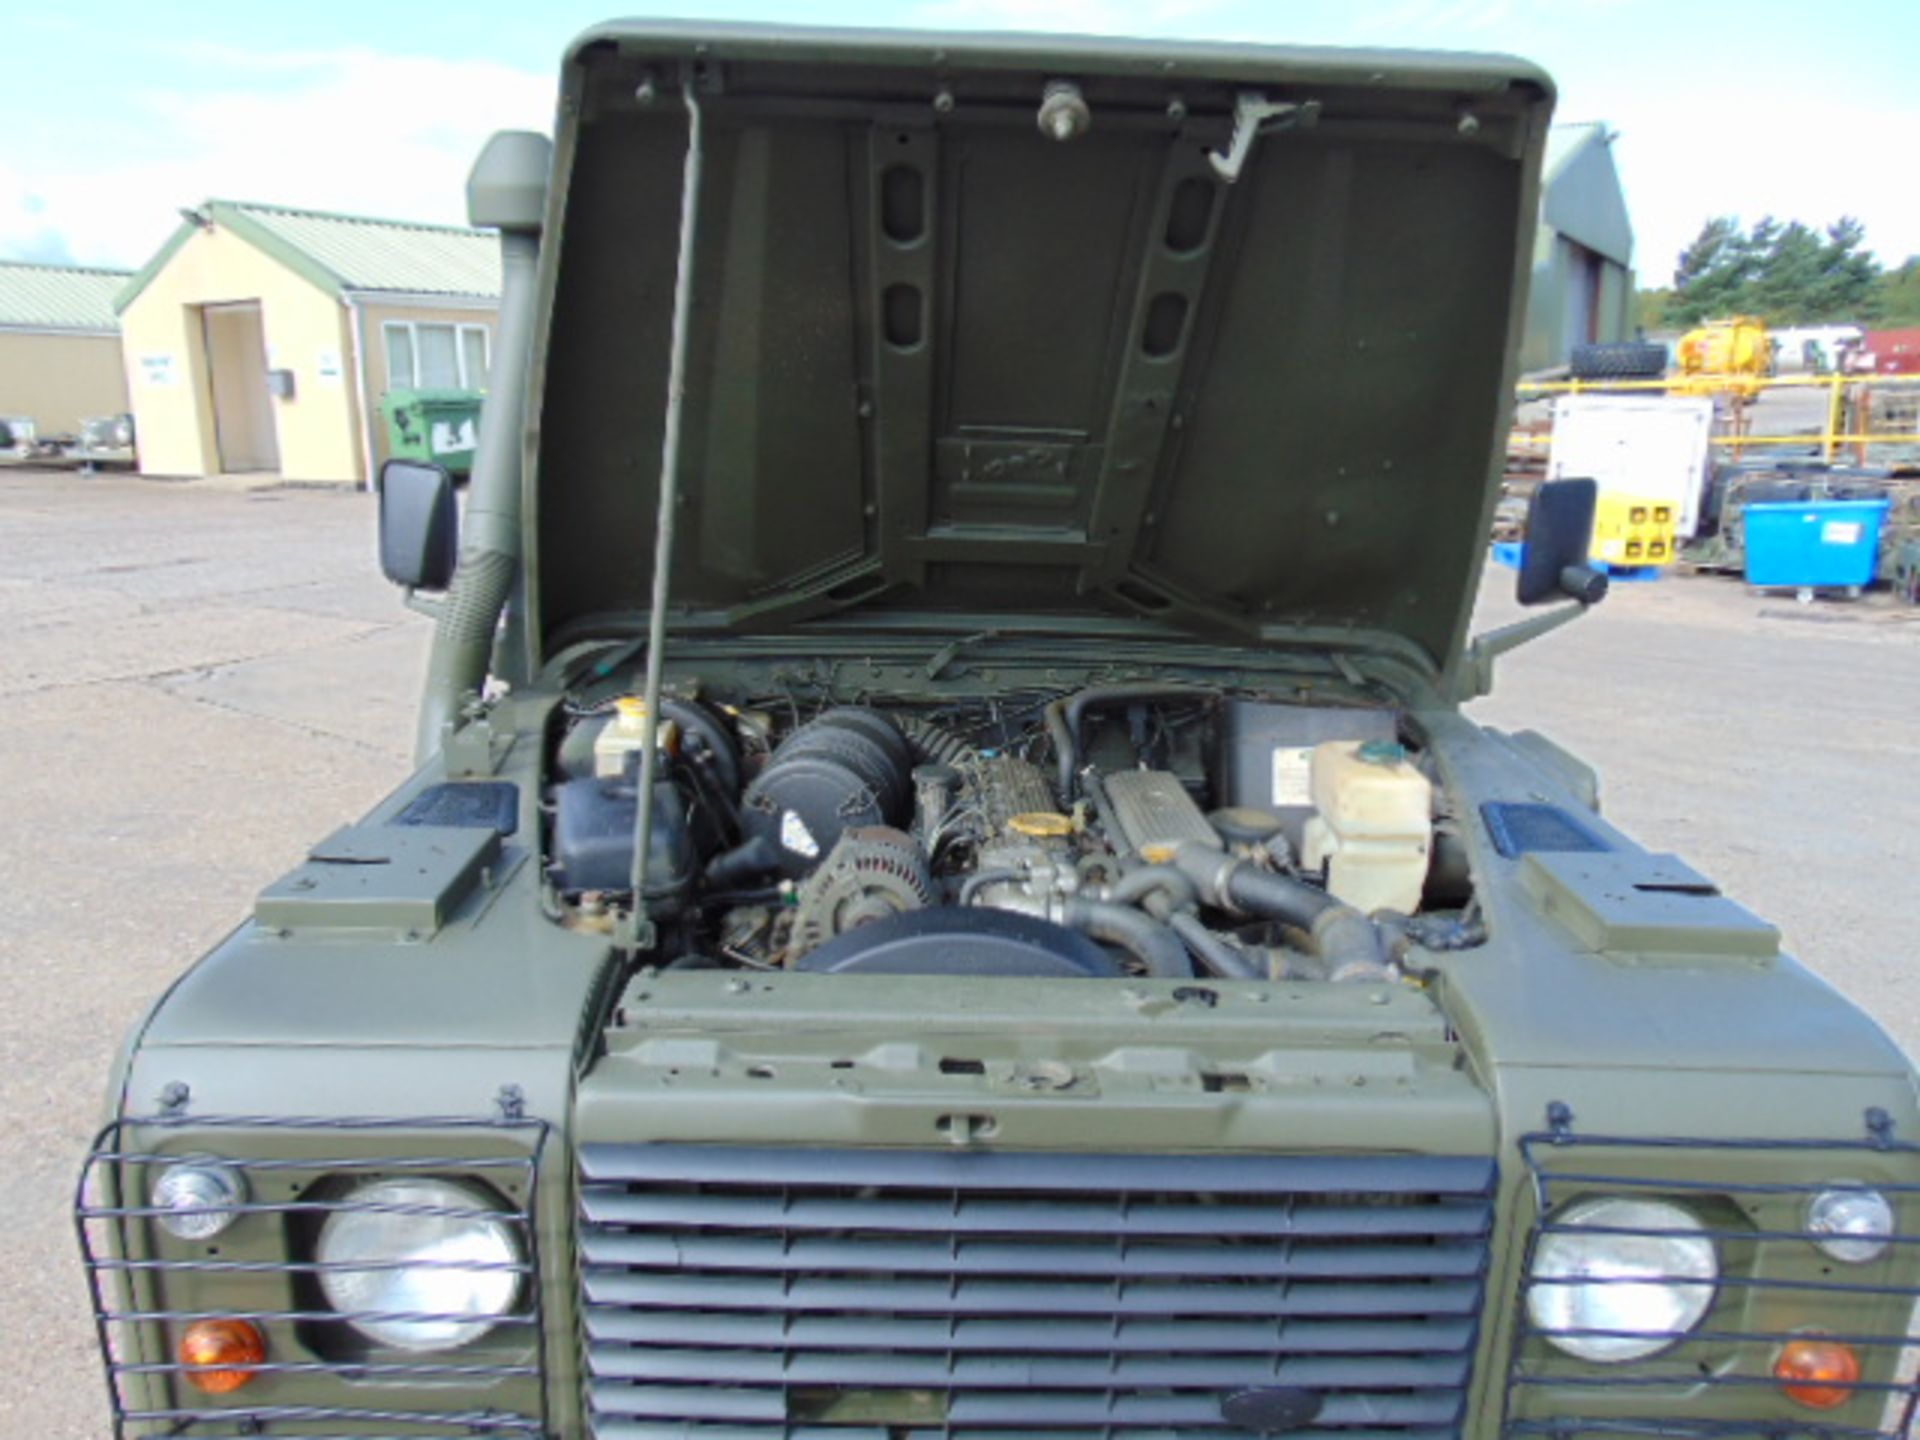 Military Specification Land Rover Wolf 110 Hard Top - Image 11 of 28